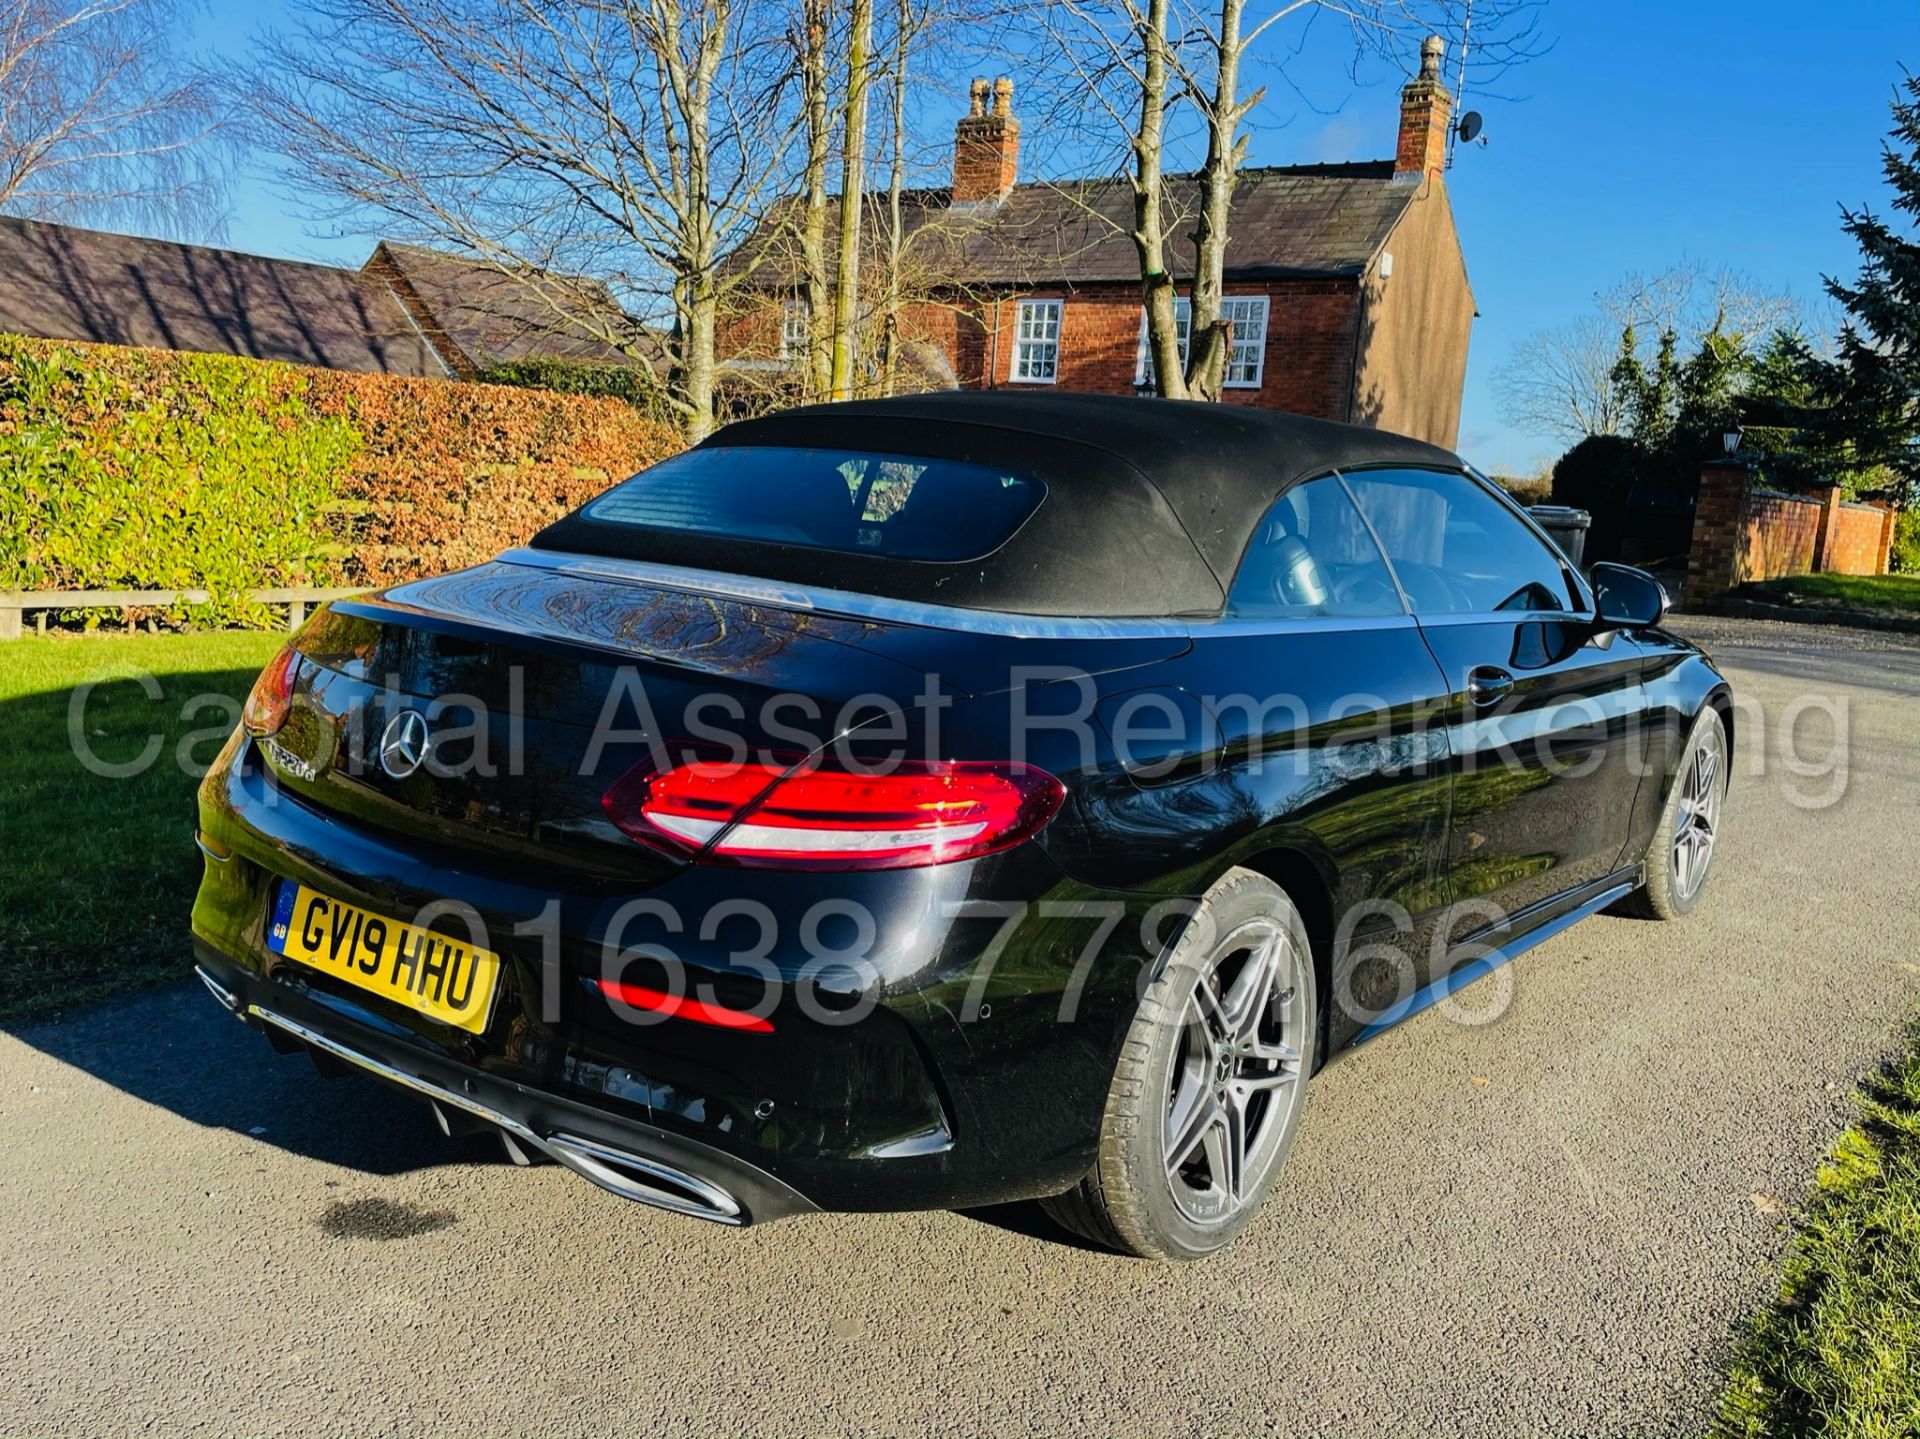 ON SALE MERCEDES-BENZ C220D *AMG LINE - CABRIOLET* (2019) '9G TRONIC AUTO - LEATHER - SAT NAV' - Image 16 of 59